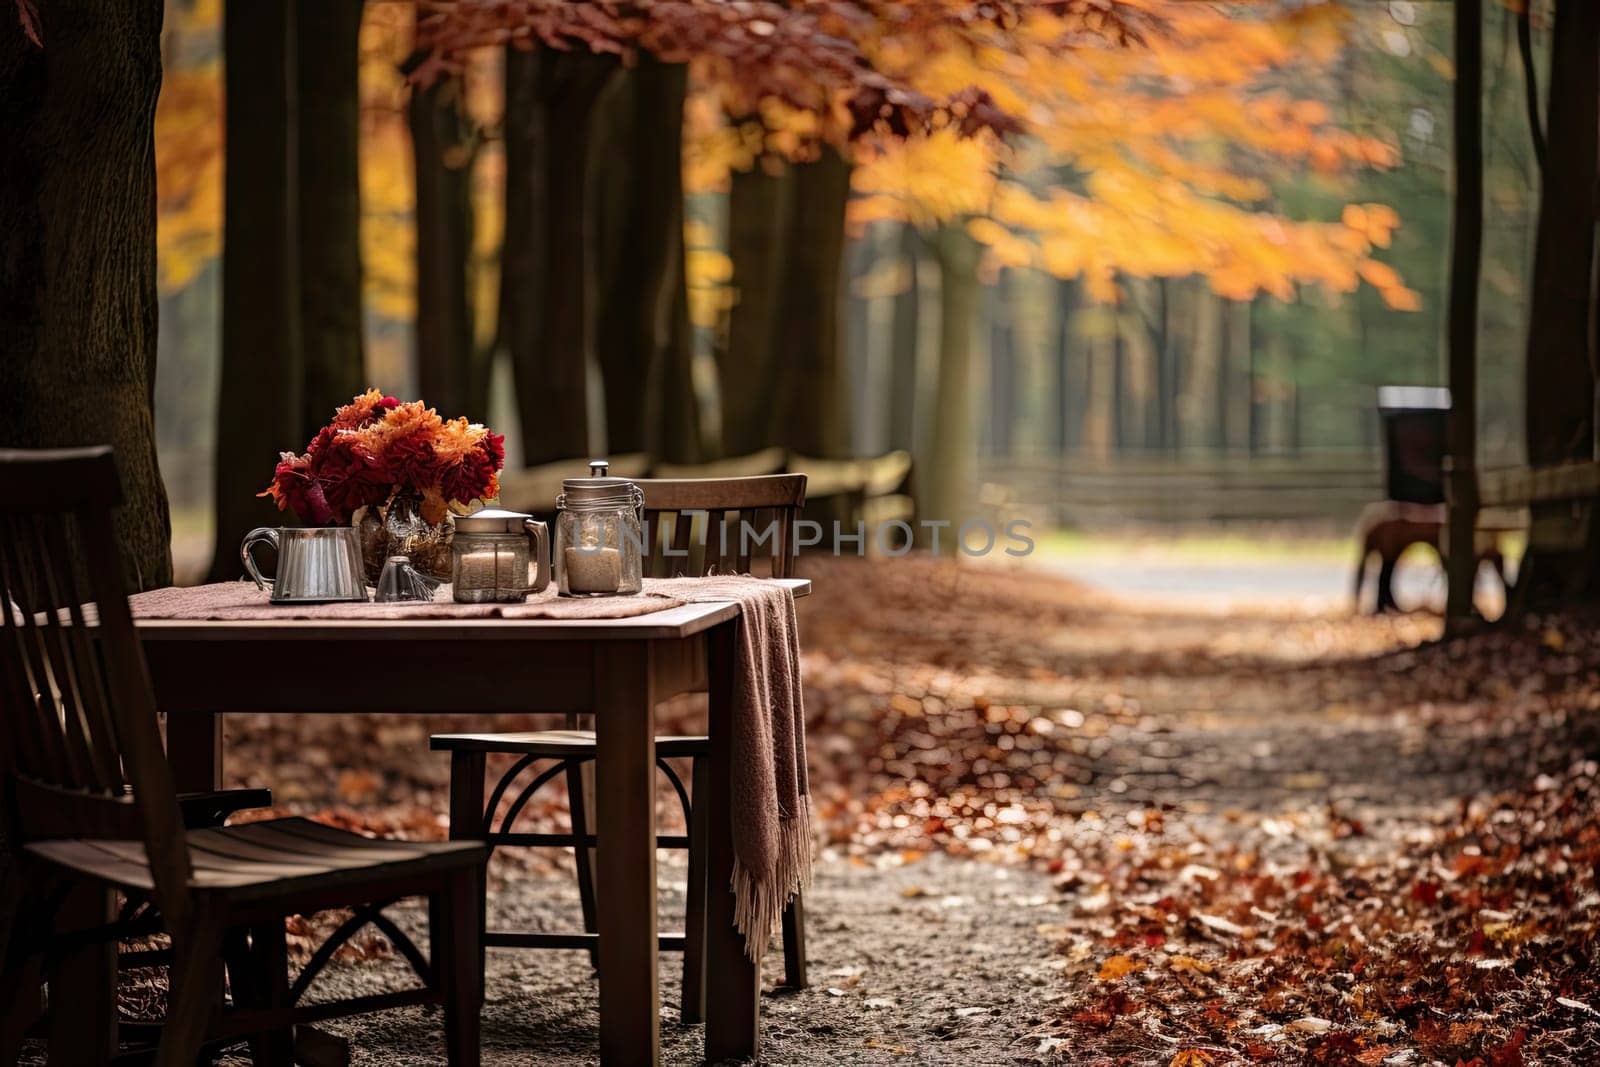 two chairs and a table in the middle of an autumn forest with leaves on the ground, one chair is empty